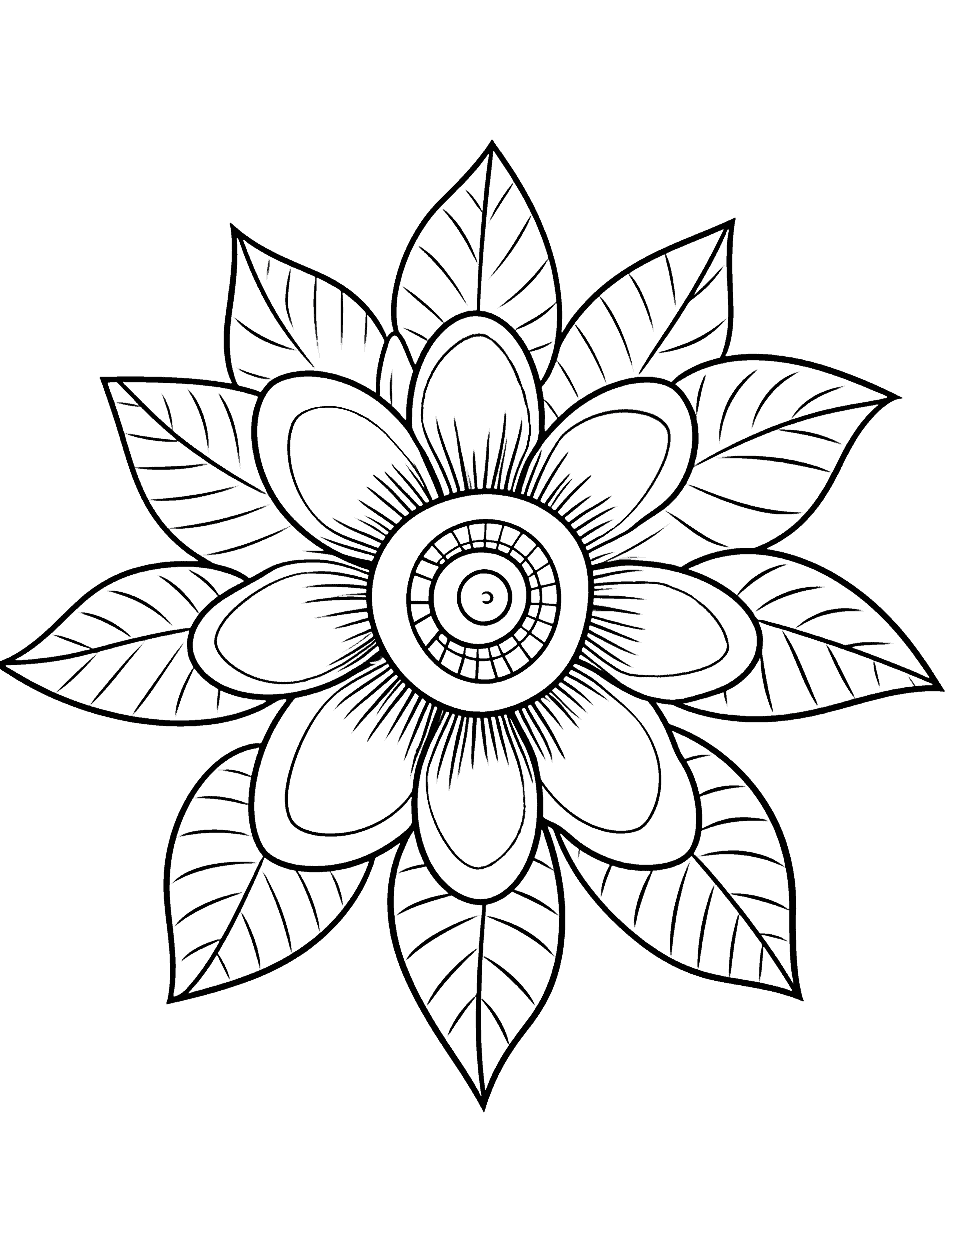 Tropical Flower Mandala Coloring Page - A mandala incorporating tropical flower designs for stress relief.